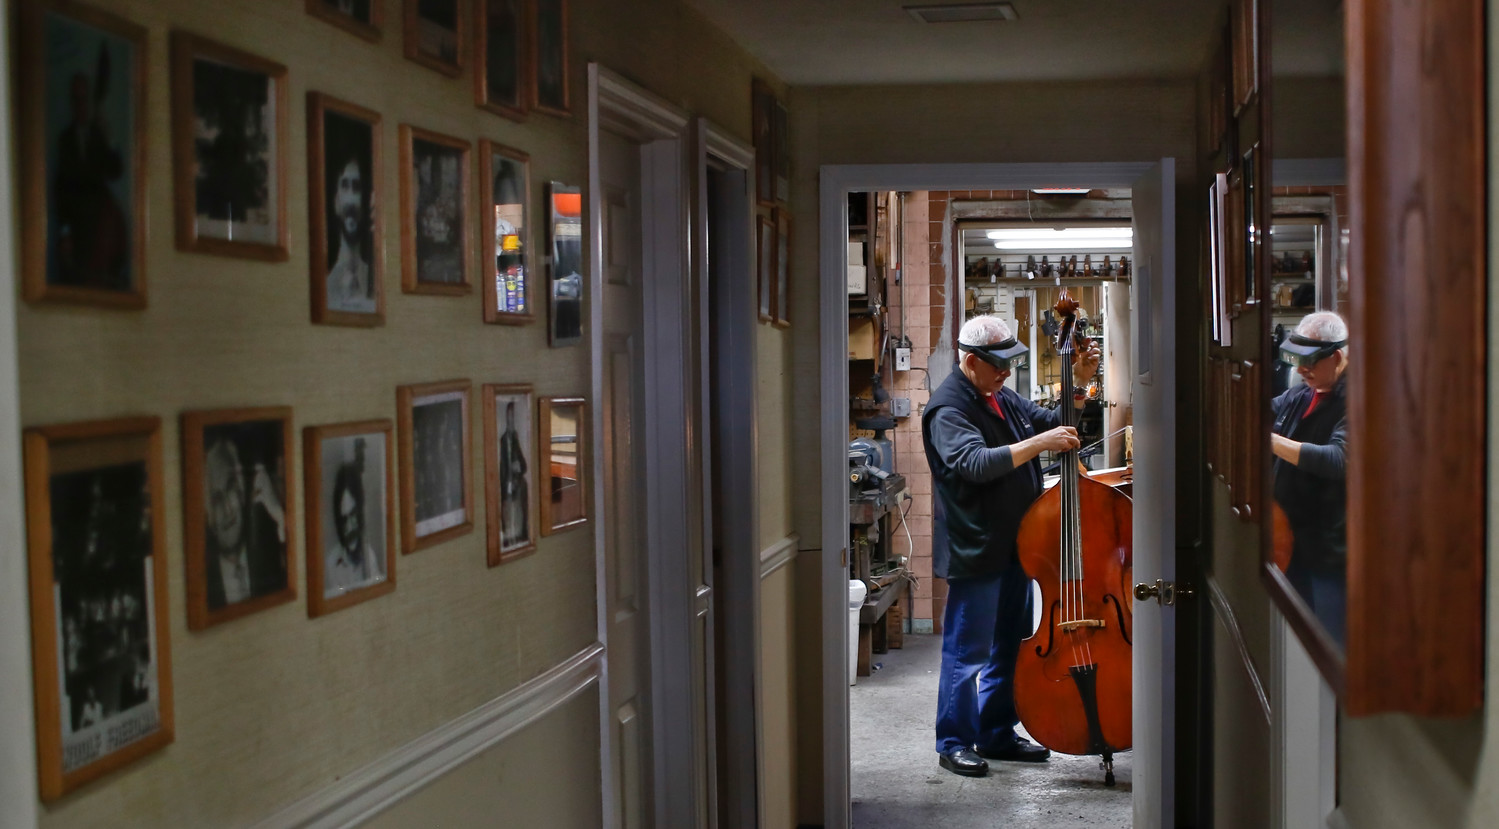 Jake Cradilas, a shop foreman who has worked at Kolstein’s for nearly 25 years, gave a newly repaired bass its final evaluation.